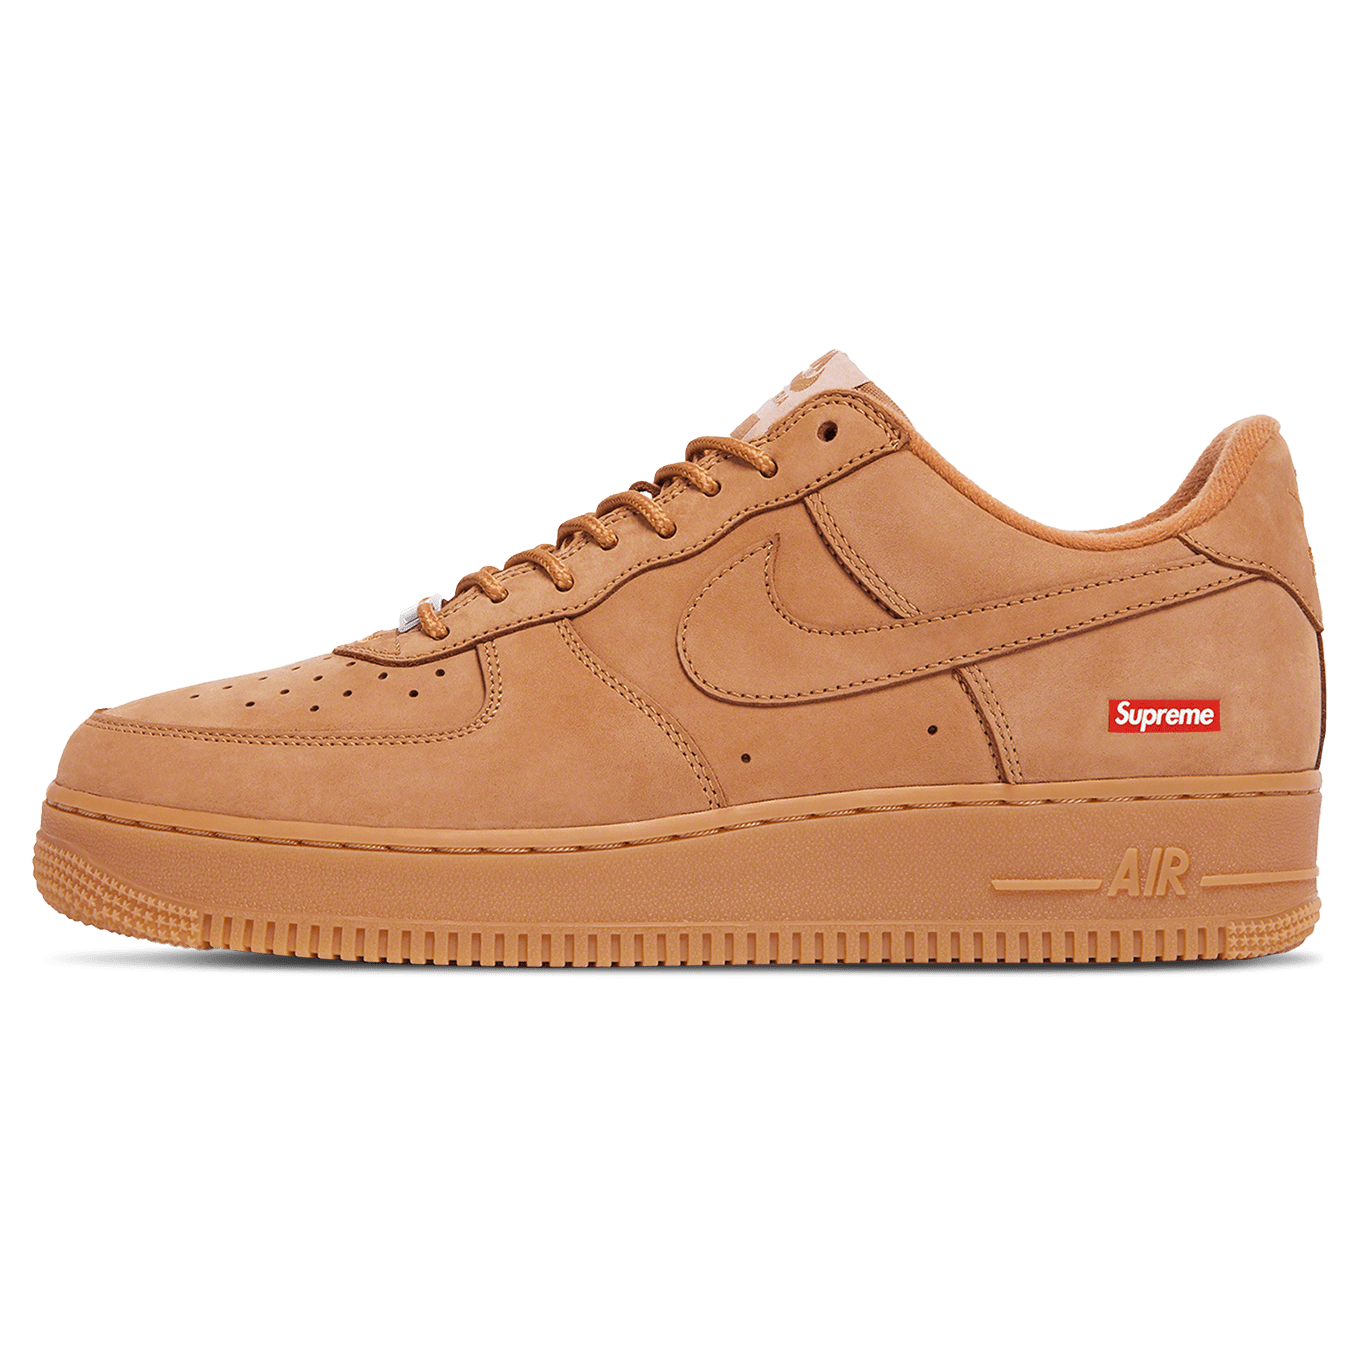 Supreme x Nike Air Force 1 Low SP Flax DN1555 200